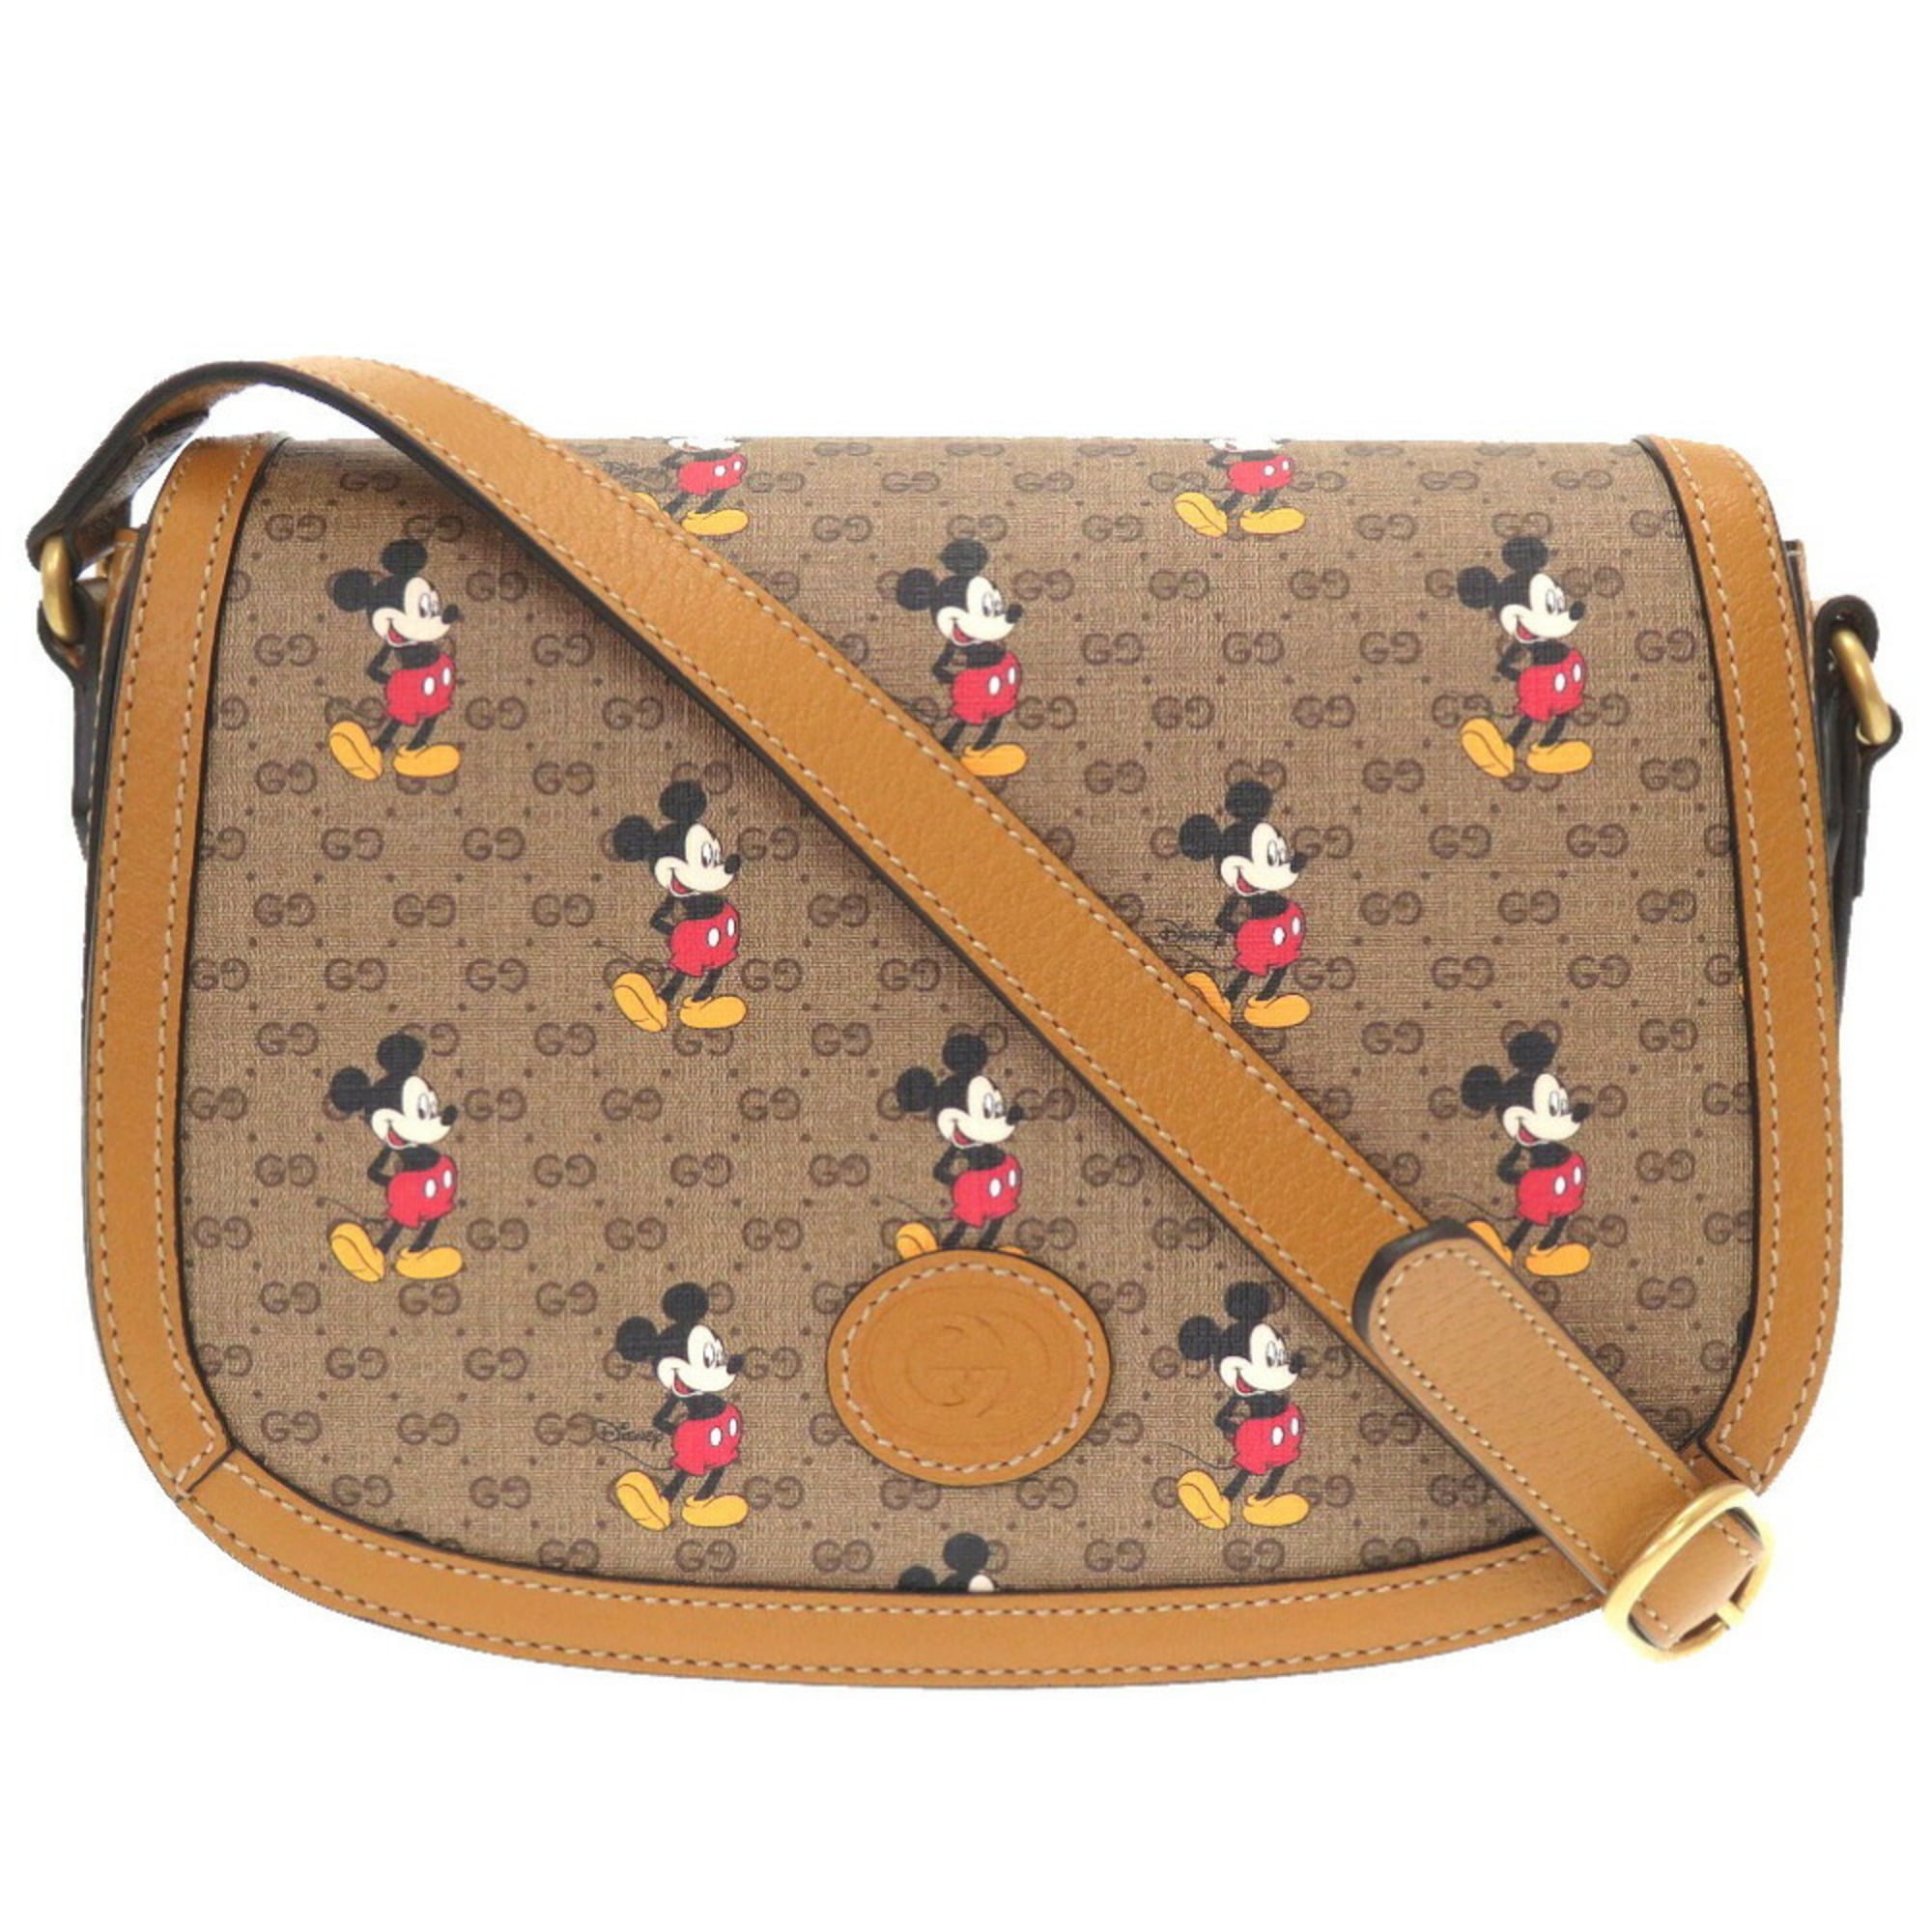 Authenticated Used Gucci x Disney GG Supreme Small Shoulder Brown